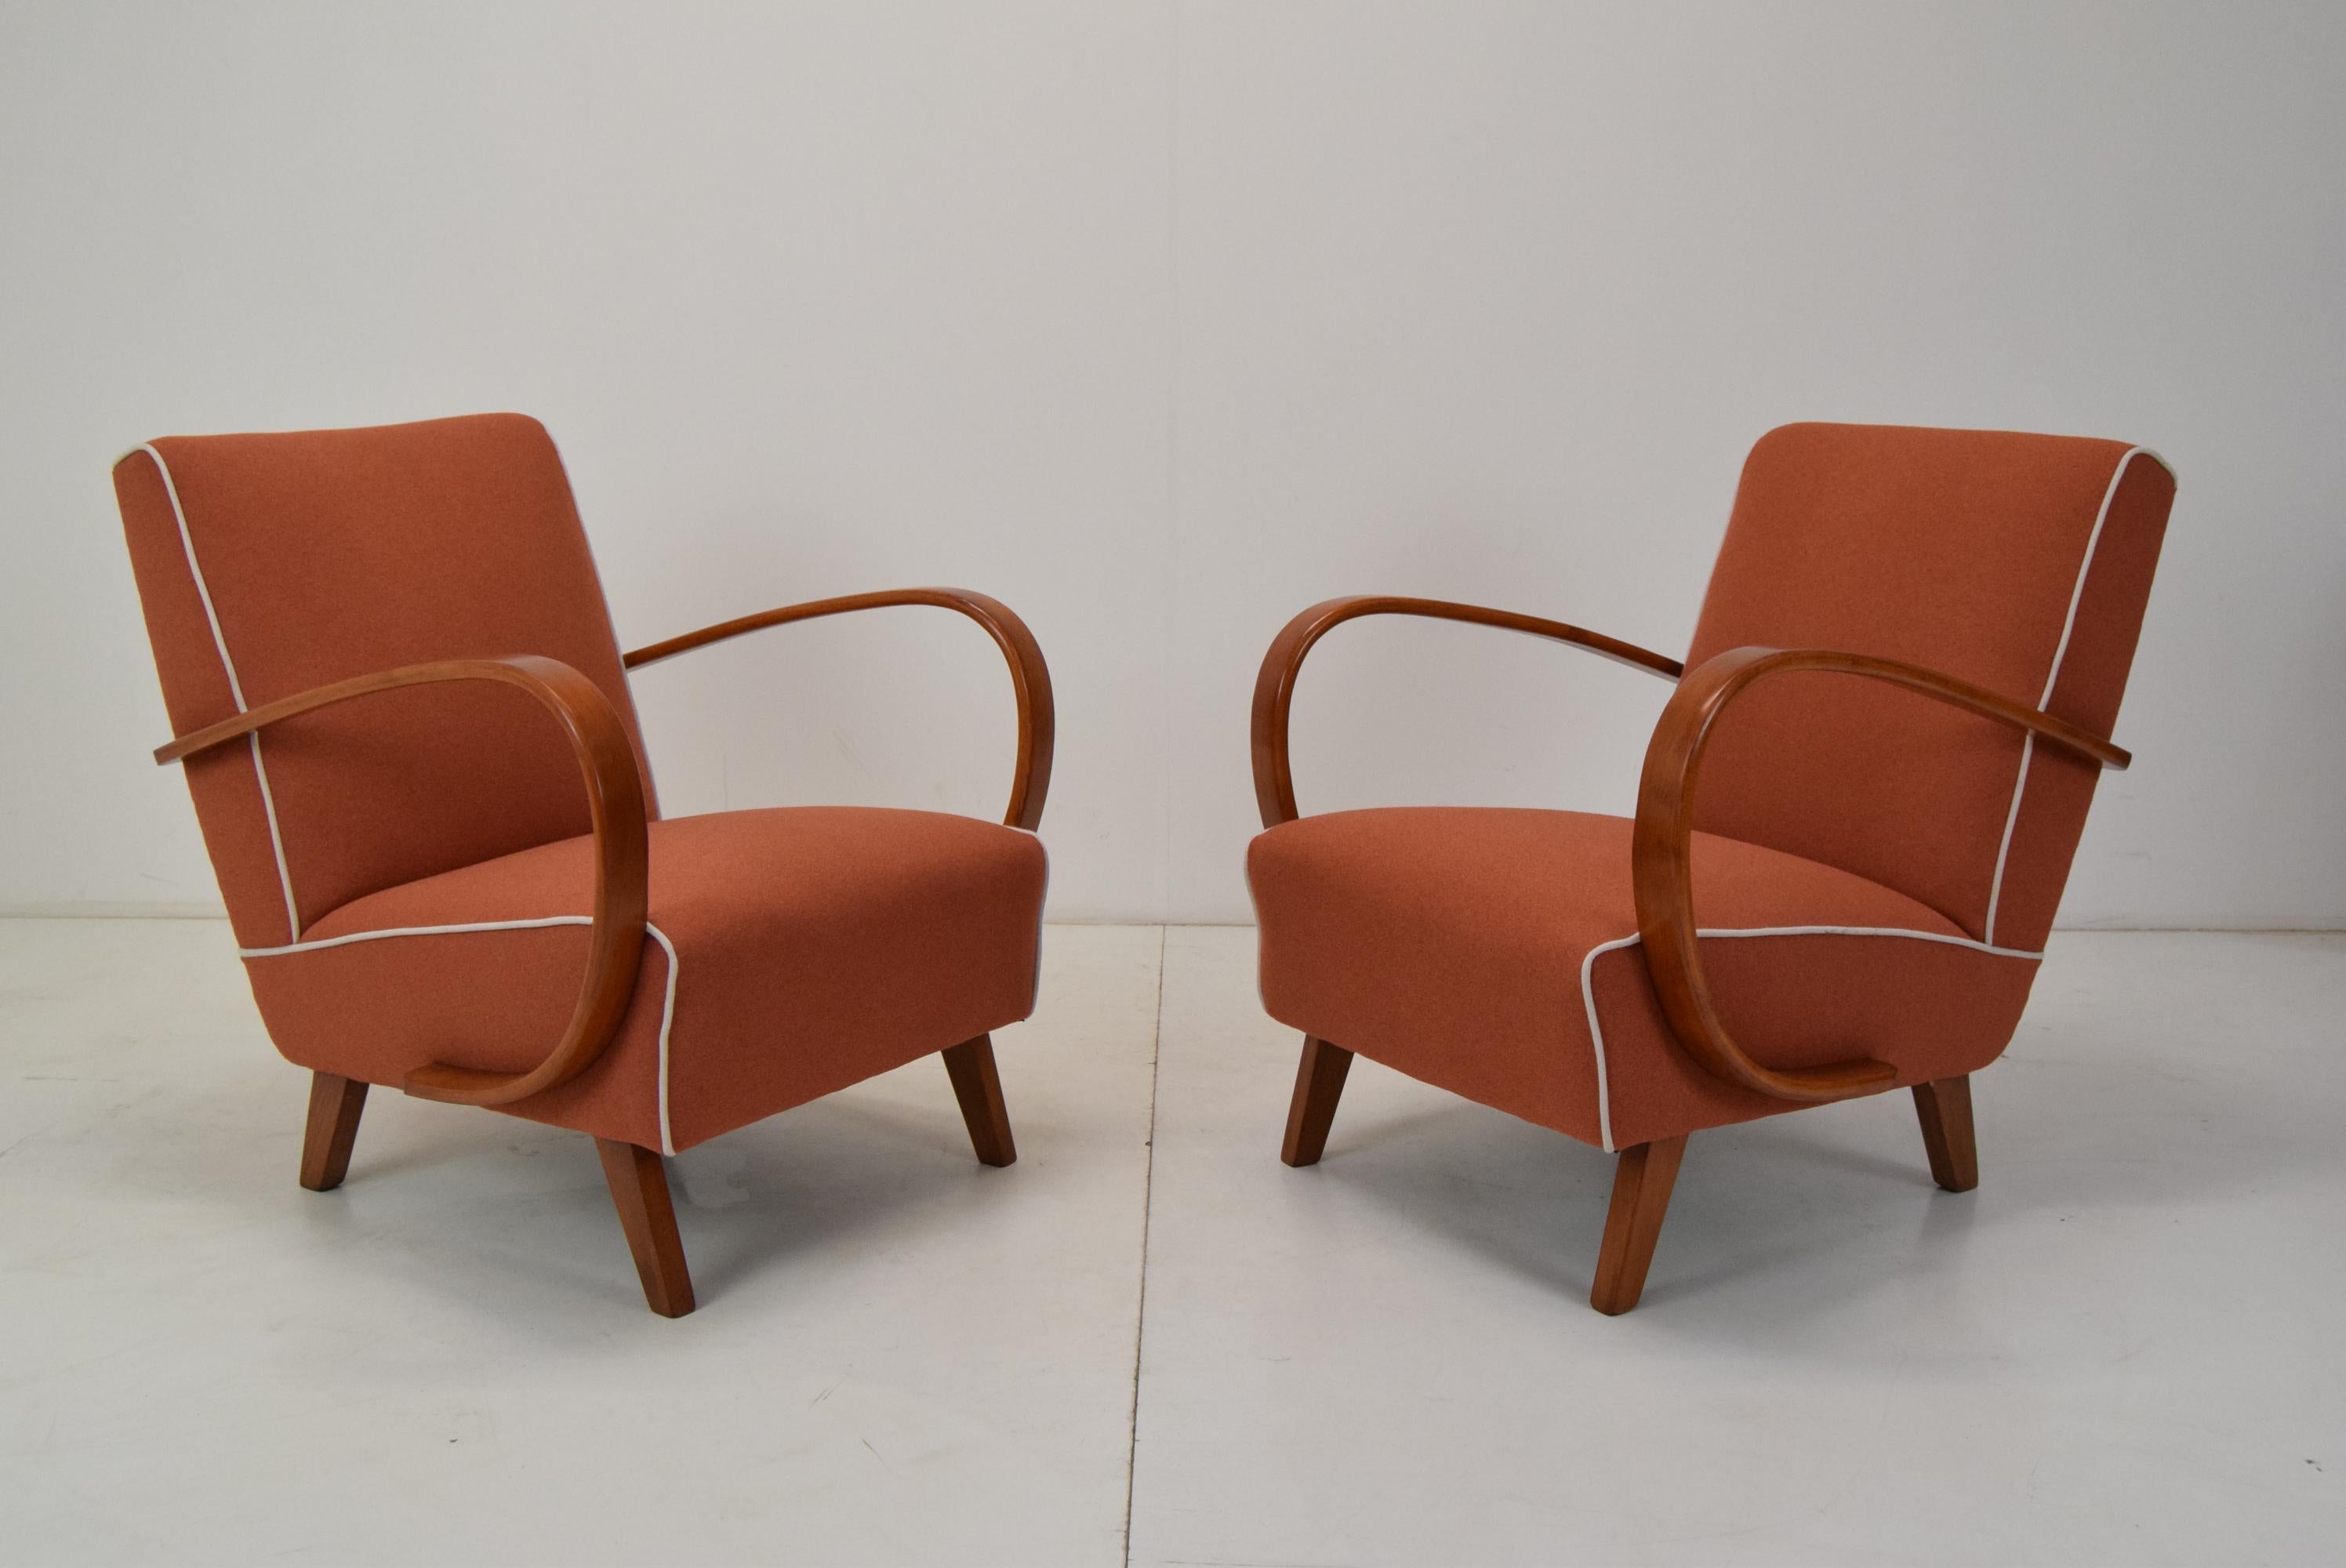 Czech Pair of Mid-Century Armchairs by Jindrich Halabala, 1950s For Sale